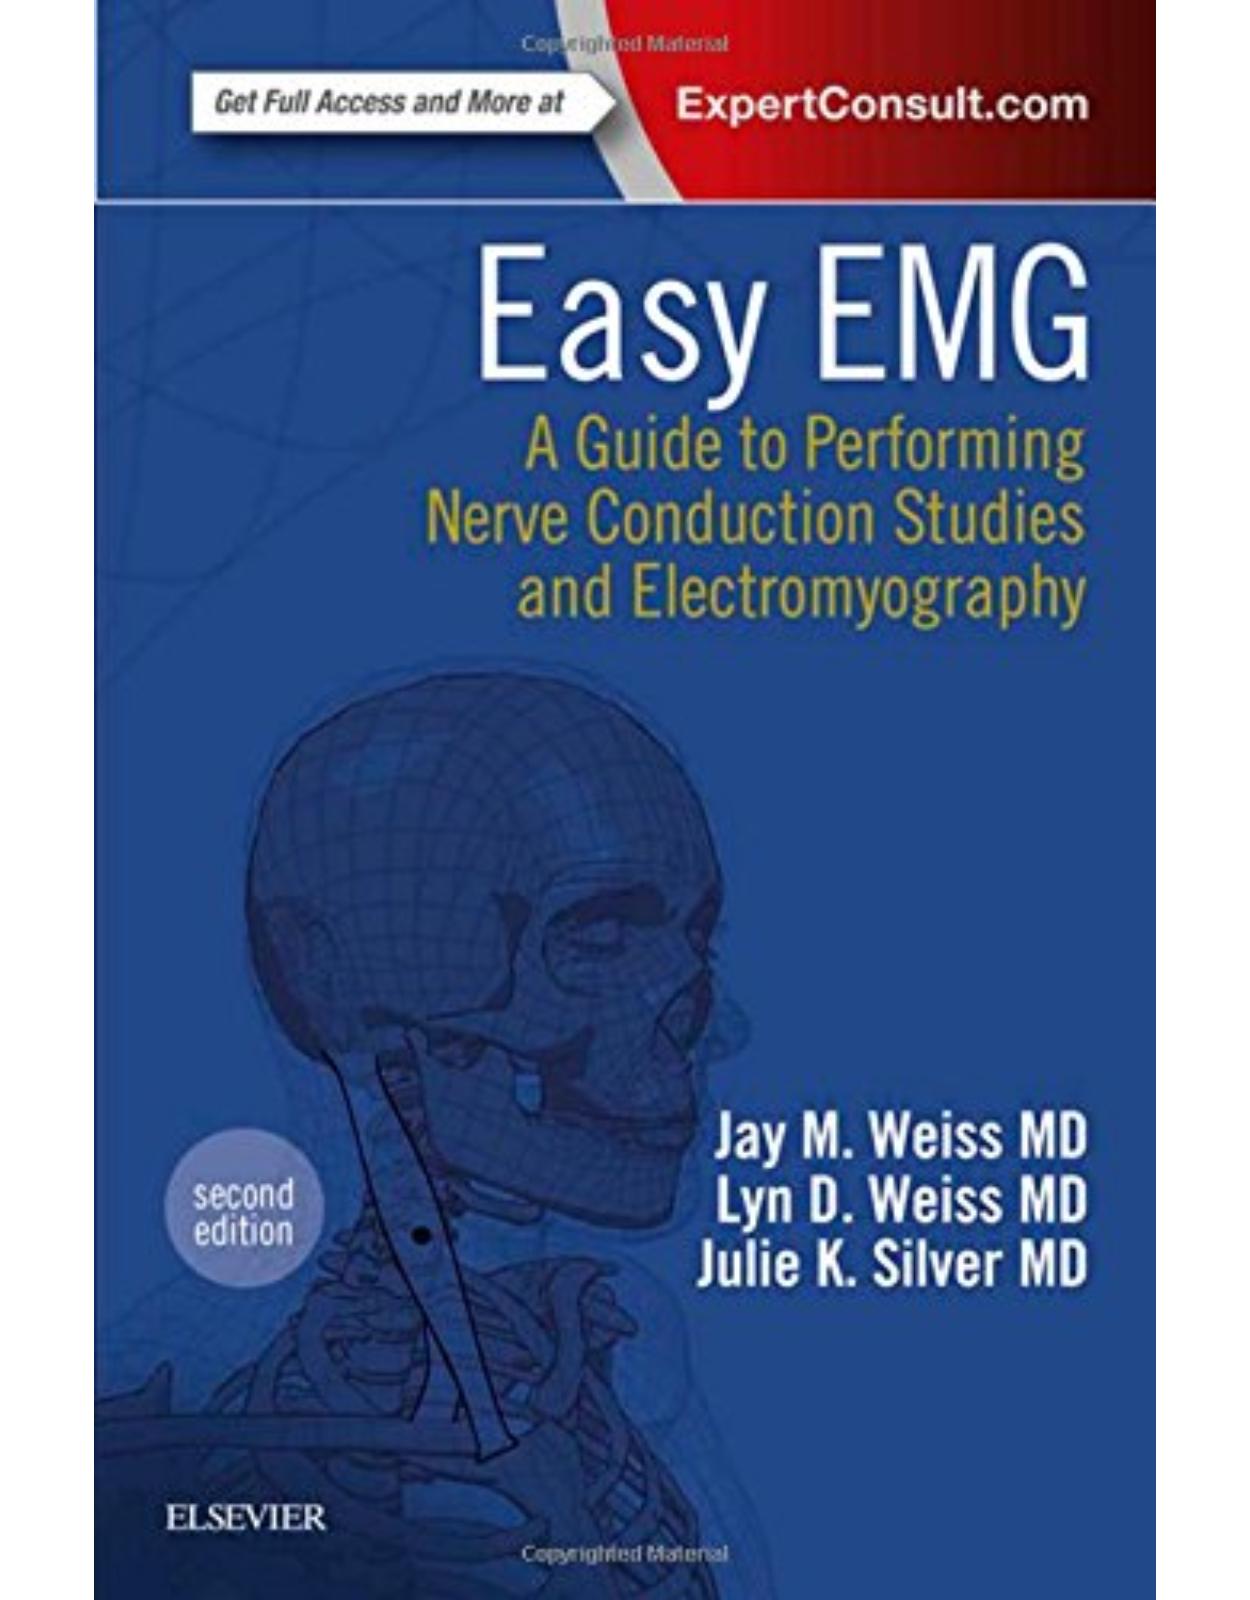 Easy EMG: A Guide to Performing Nerve Conduction Studies and Electromyography, 2e